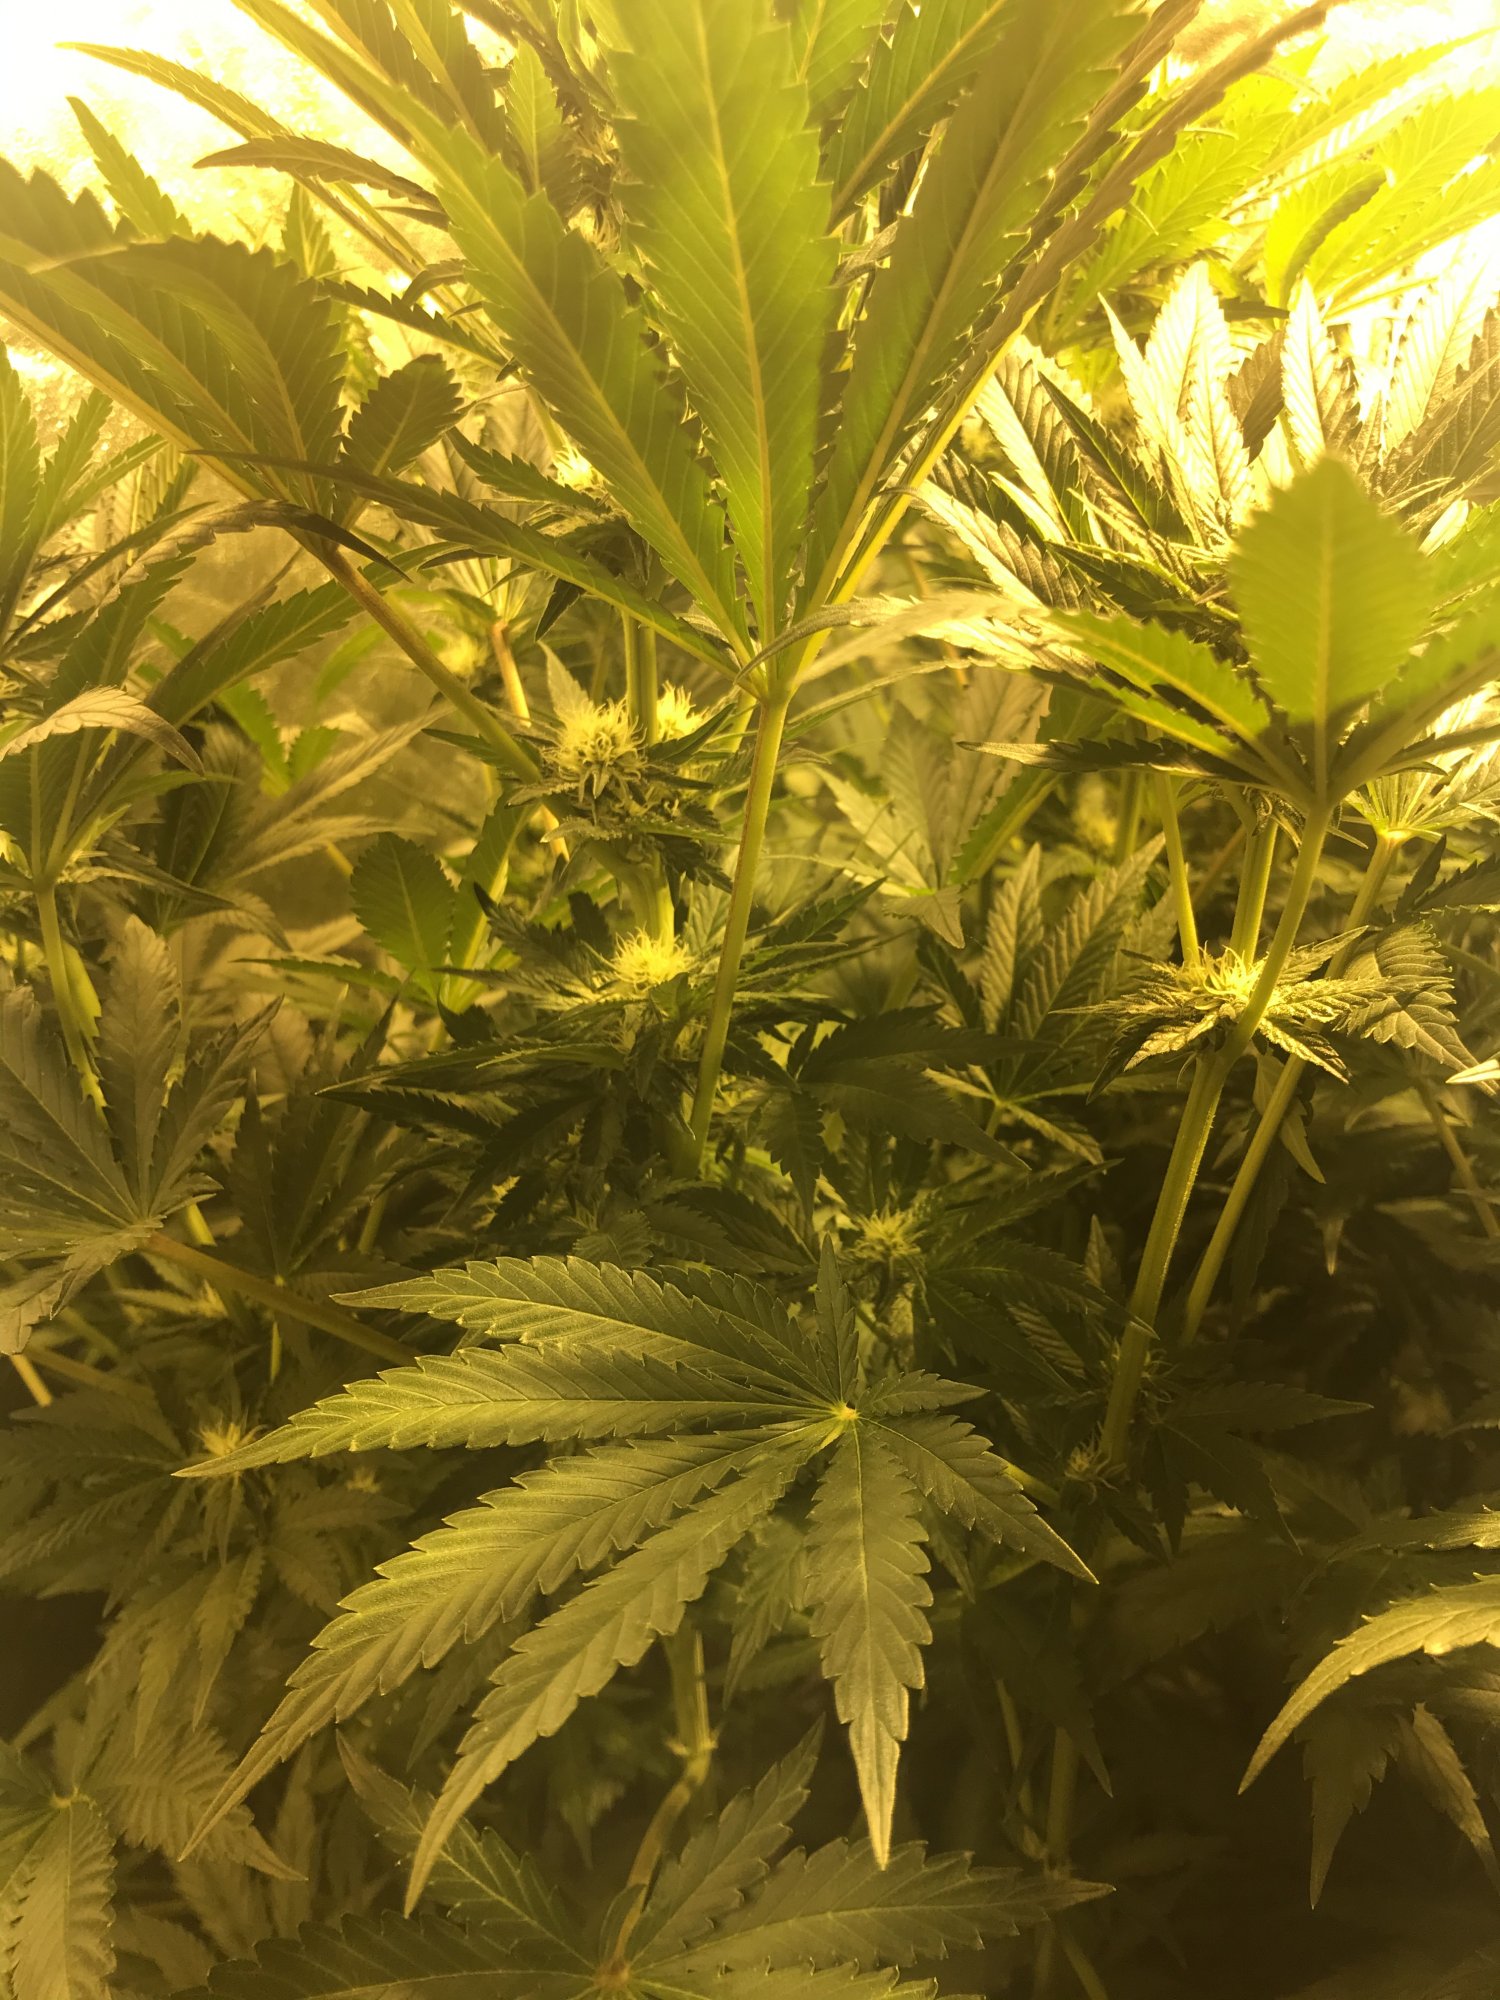 Please have a look at my plants 3 weeks into flower today 11